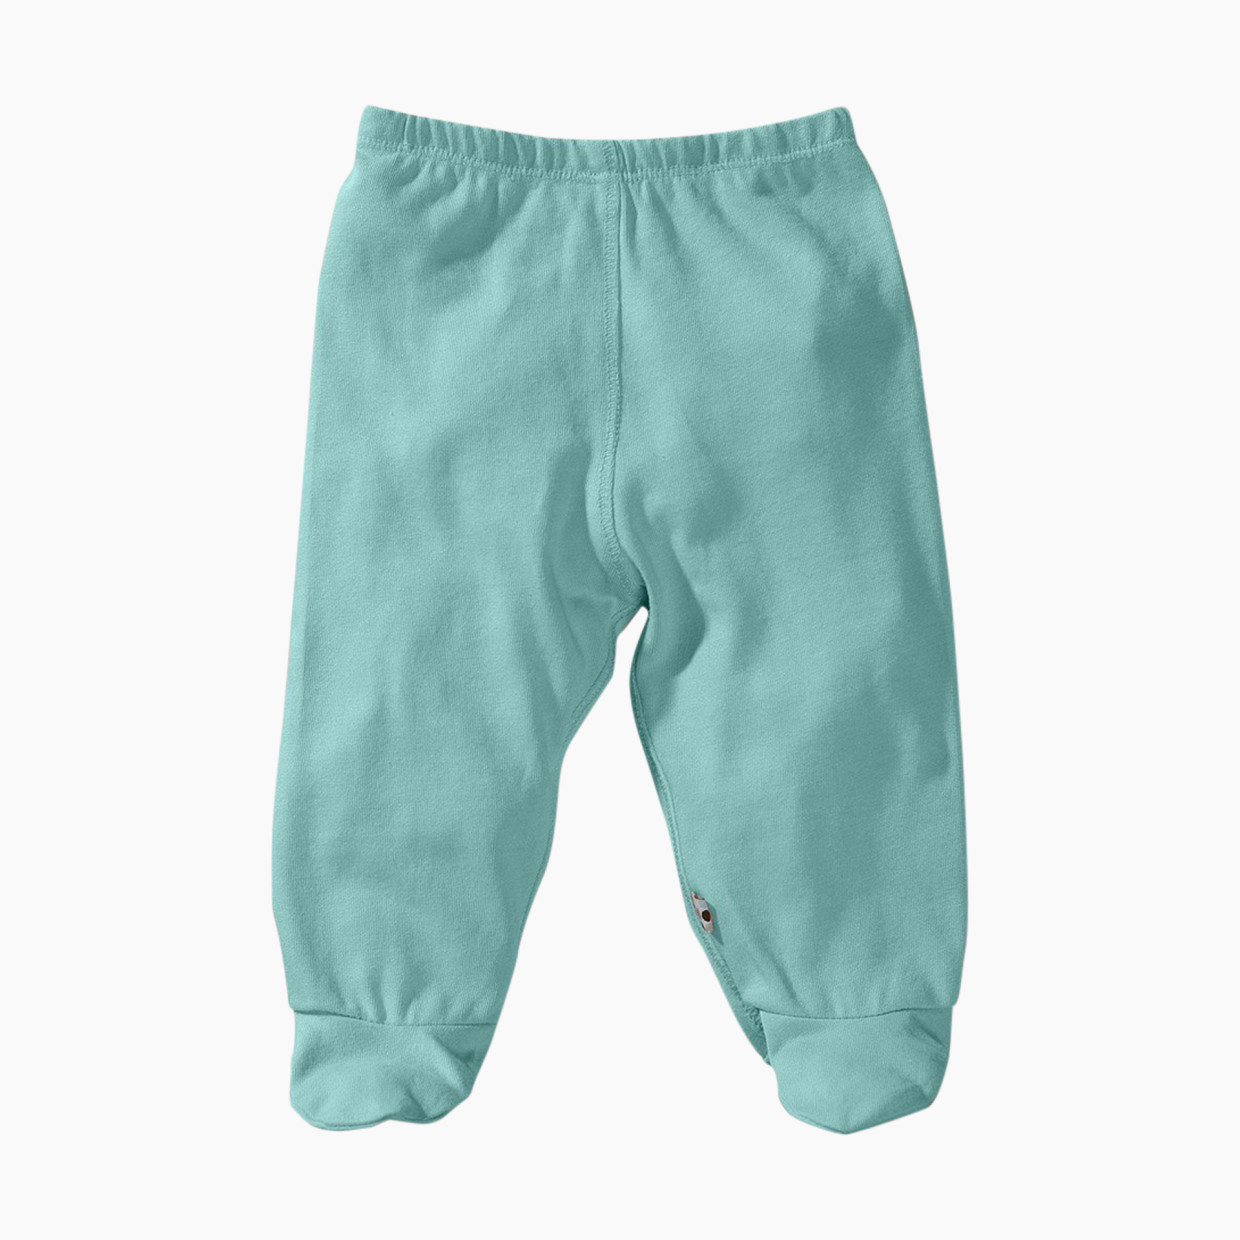 Babysoy Organic Cotton Solid Footie Pants - Harbor, 0-3 Months.